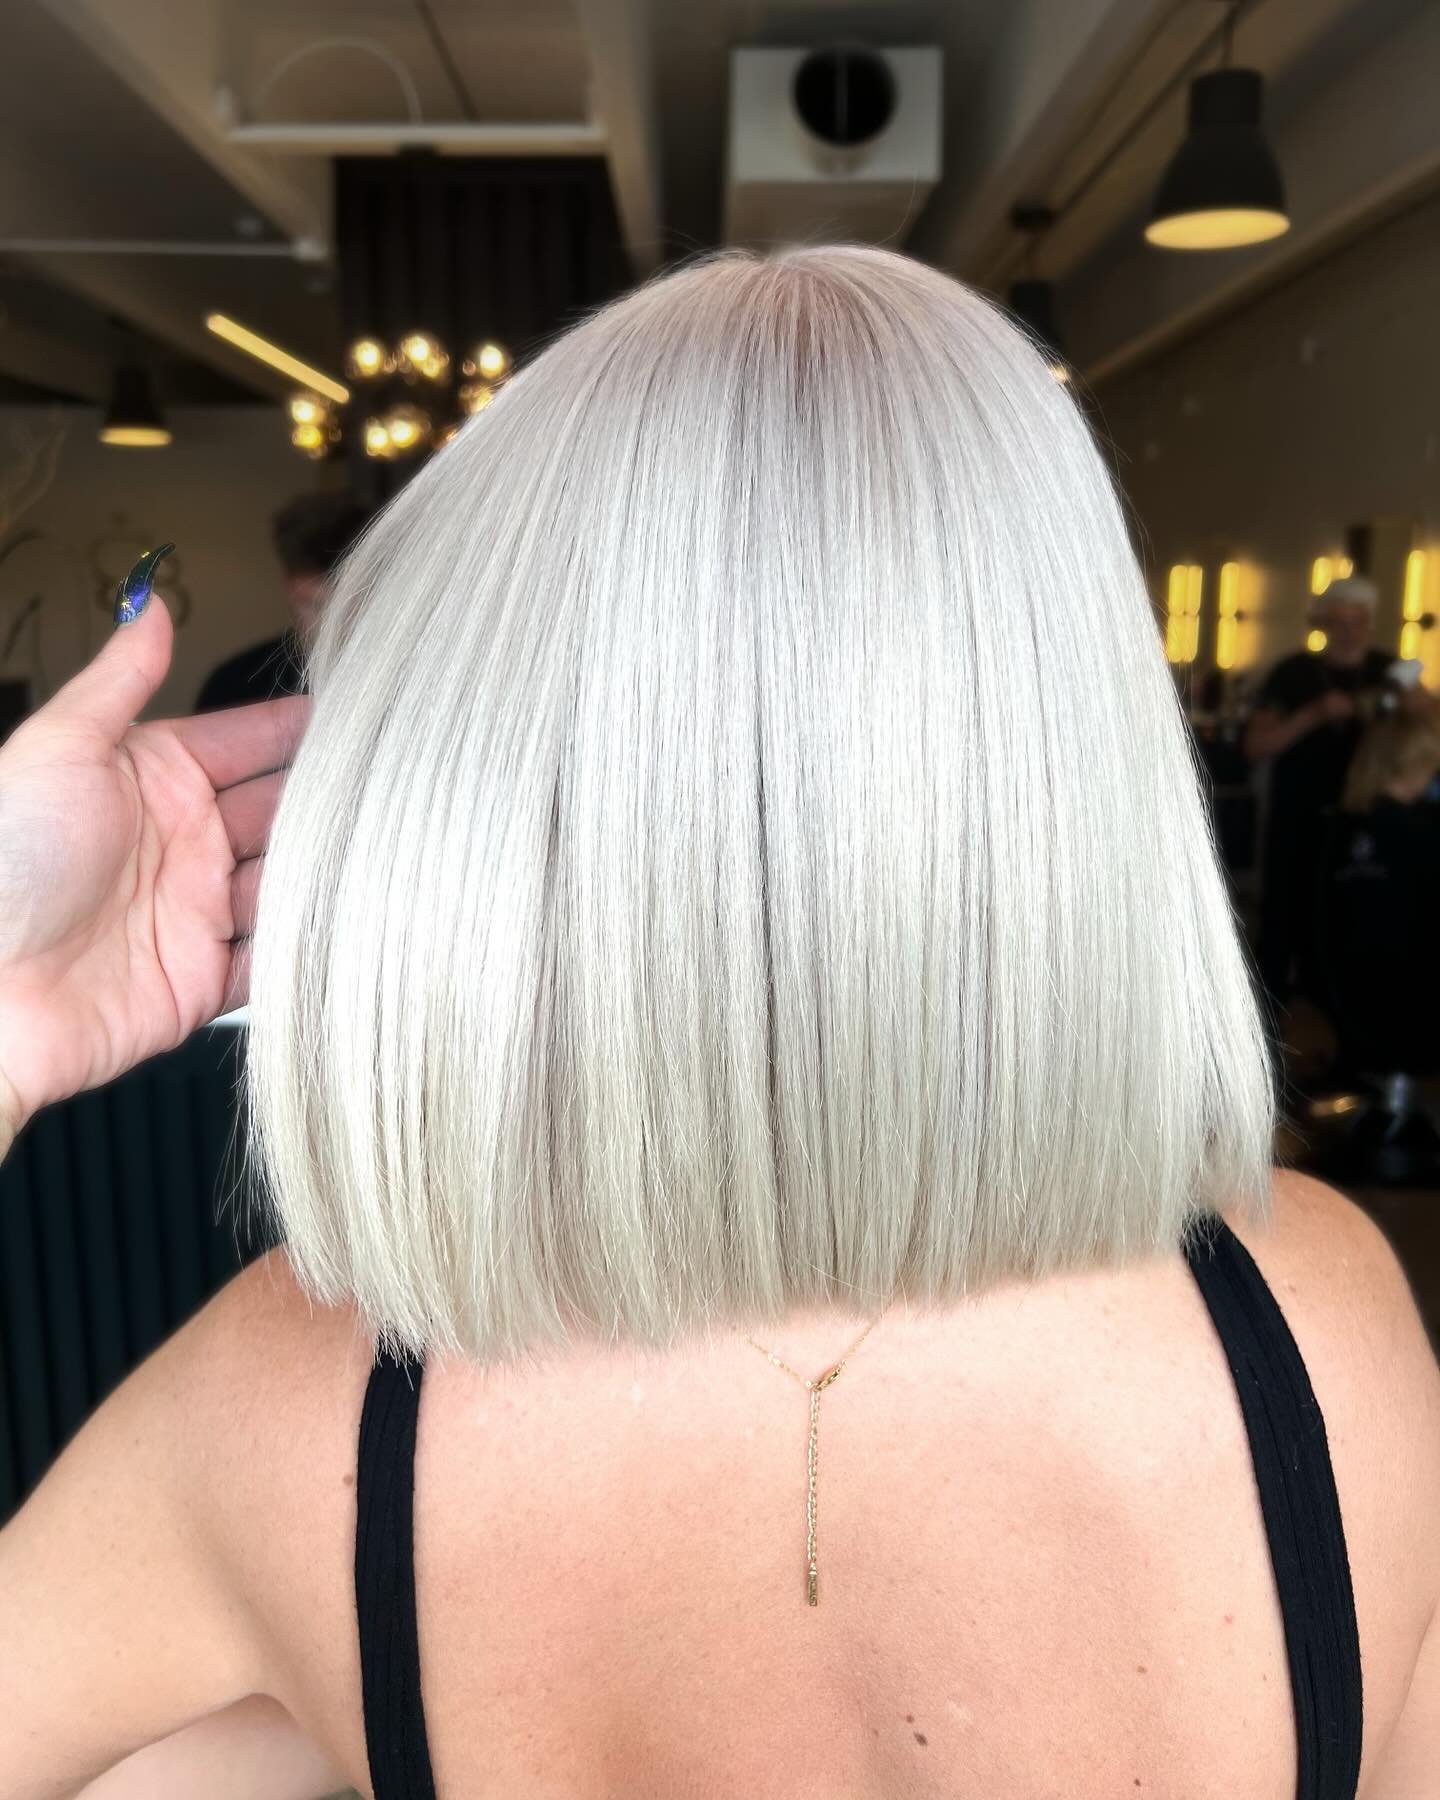 🌟 Blonde Ambition Unleashed! 

🌟 Major shoutout to the incredible Gabriella for mastering this stunning blonde tone. ✨ 

Isn&rsquo;t it just mesmerizing? Let&rsquo;s all take a moment to appreciate her artistry. 🙌
Gabriella used all luxury hair pr